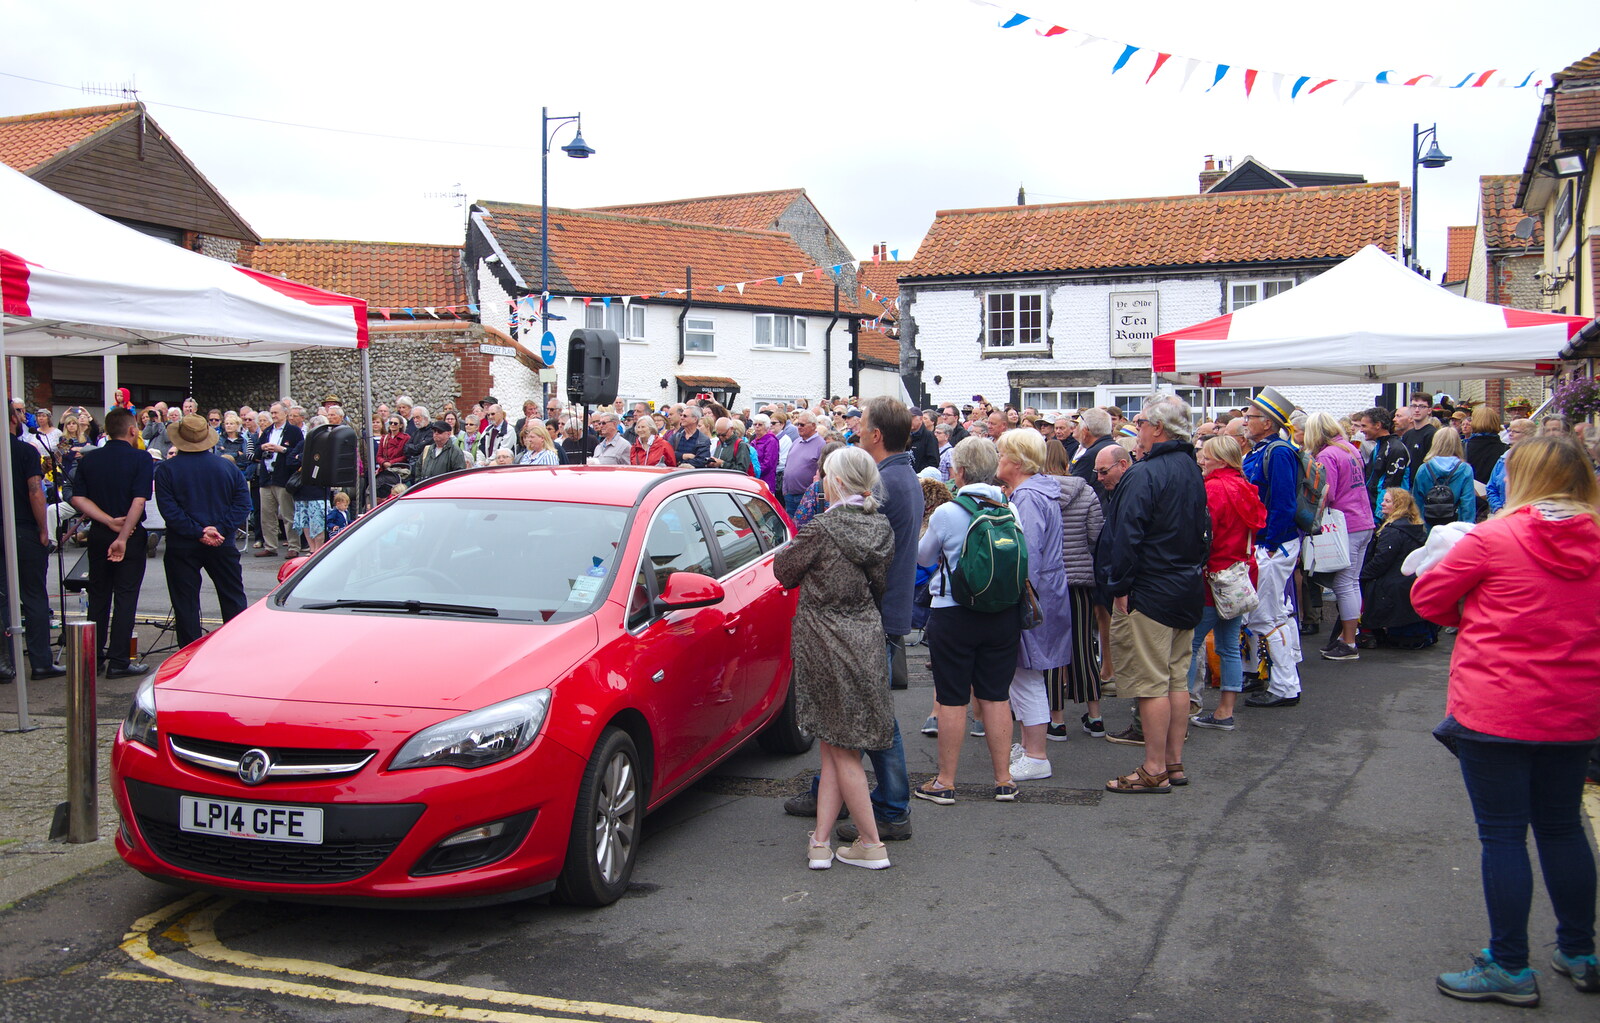 There's a good crowd still watching the singing from Kelling Camping and the Potty Morris Festival, Sheringham, North Norfolk - 6th July 2019